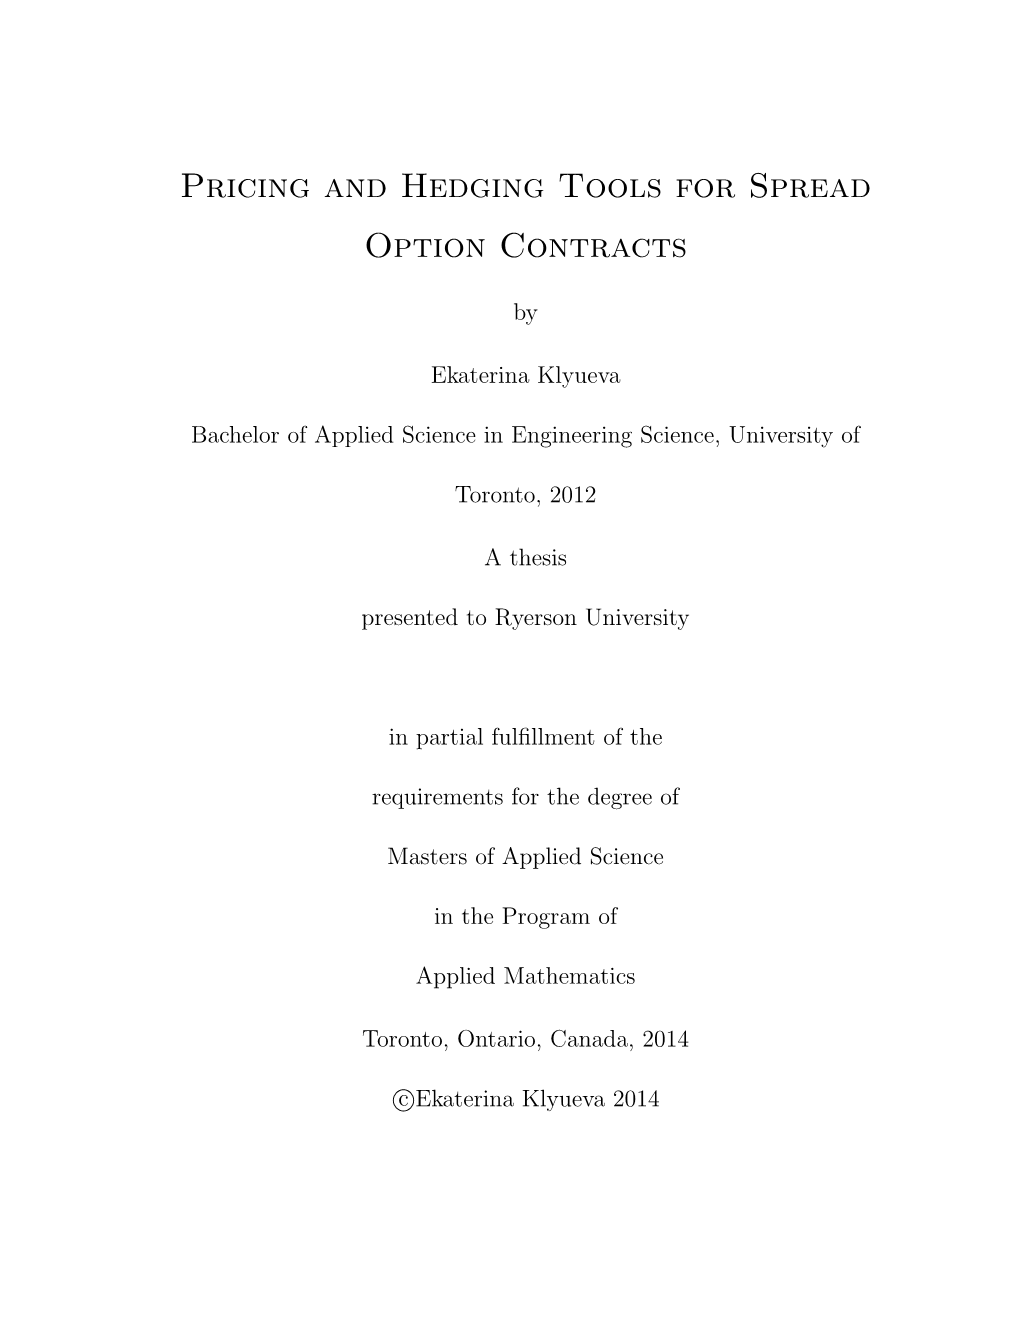 Pricing and Hedging Tools for Spread Option Contracts